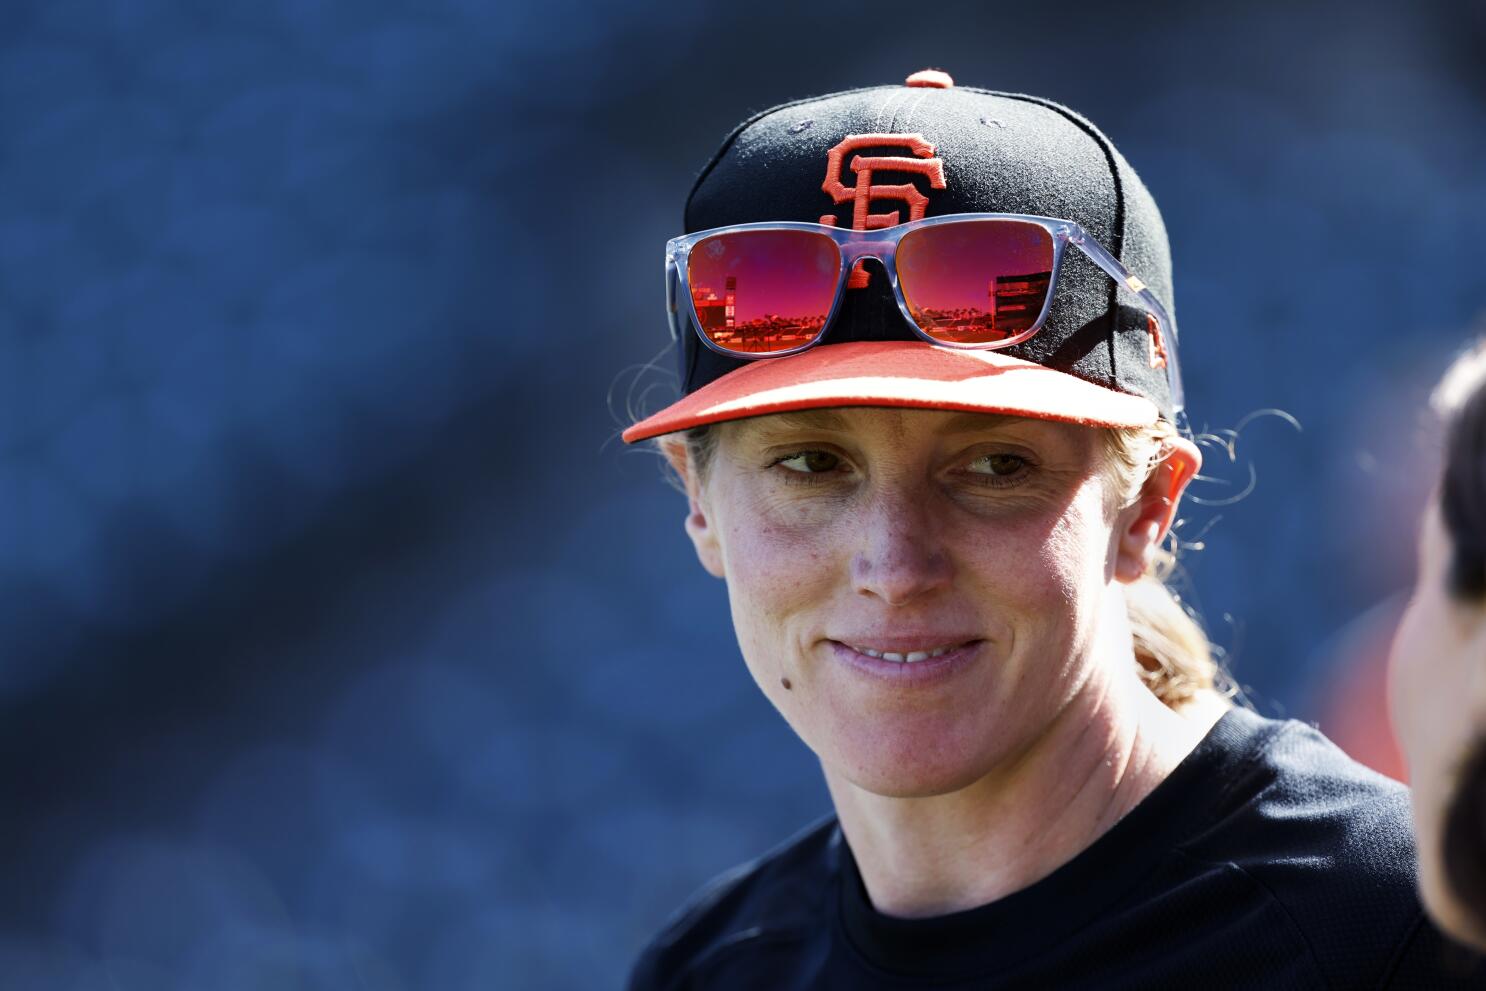 National Girls and Women in Sports Day, by San Francisco Giants